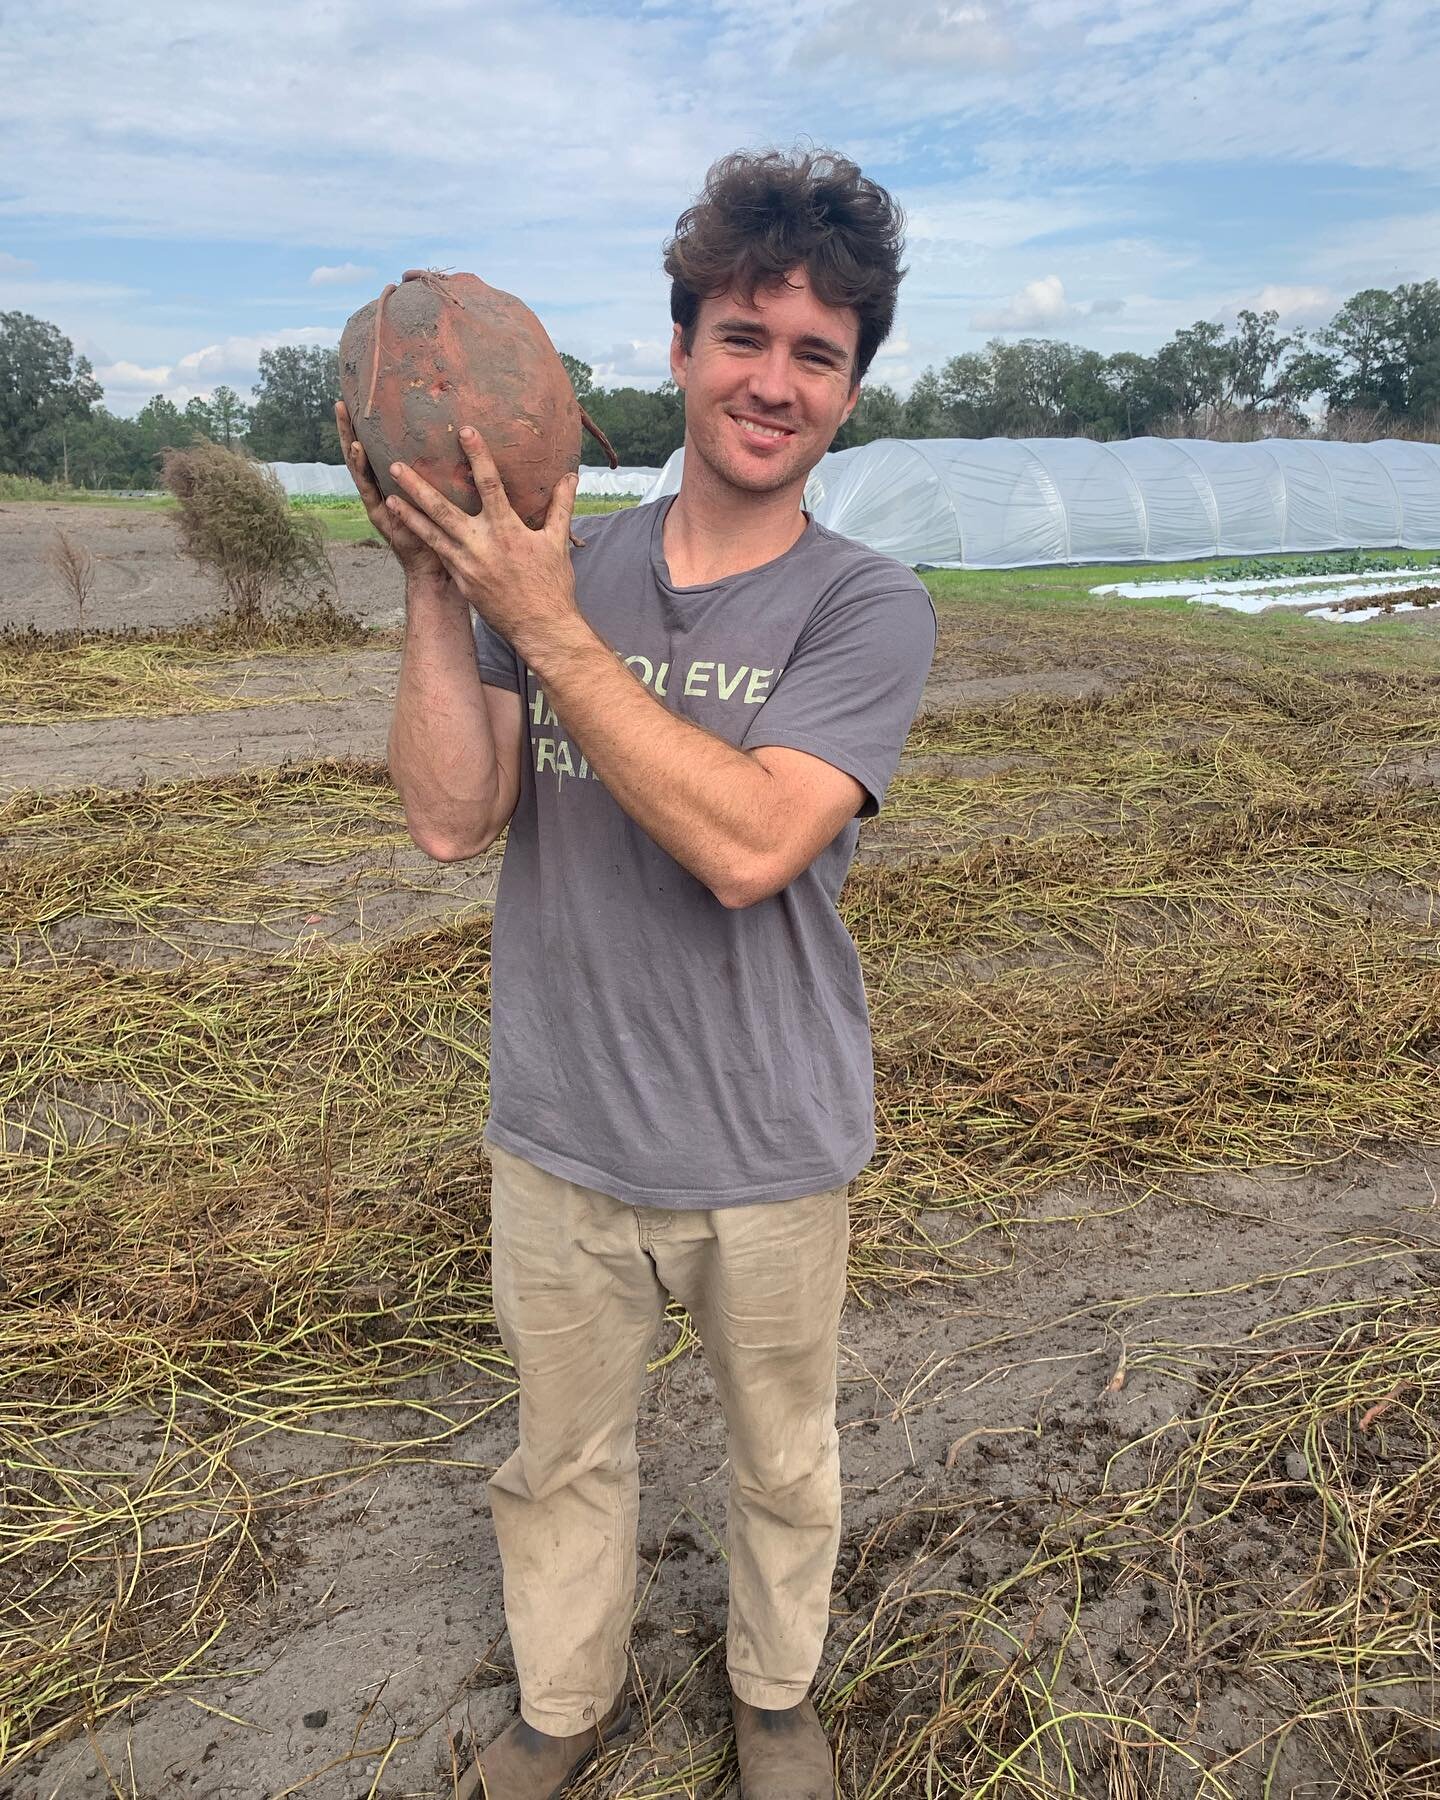 This will be long. But before I get started, this is Eric holding the worlds largest sweet potato. Many folks have asked me what&rsquo;s up with the farm and when will I do another CSA. So here&rsquo;s what&rsquo;s up. After the stressful 2021-22 sea